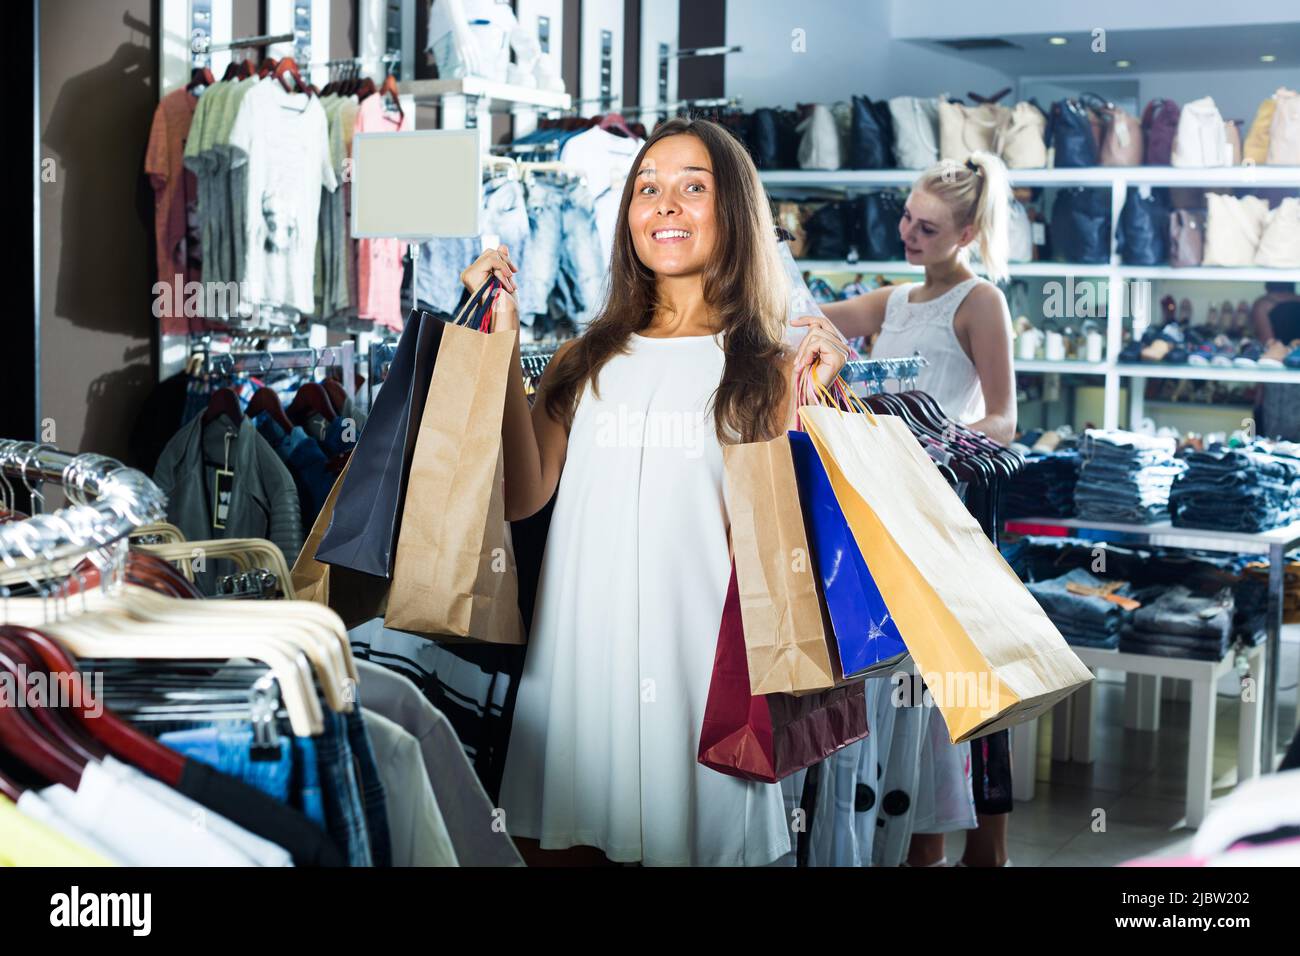 woman carrying many paper bags Stock Photo